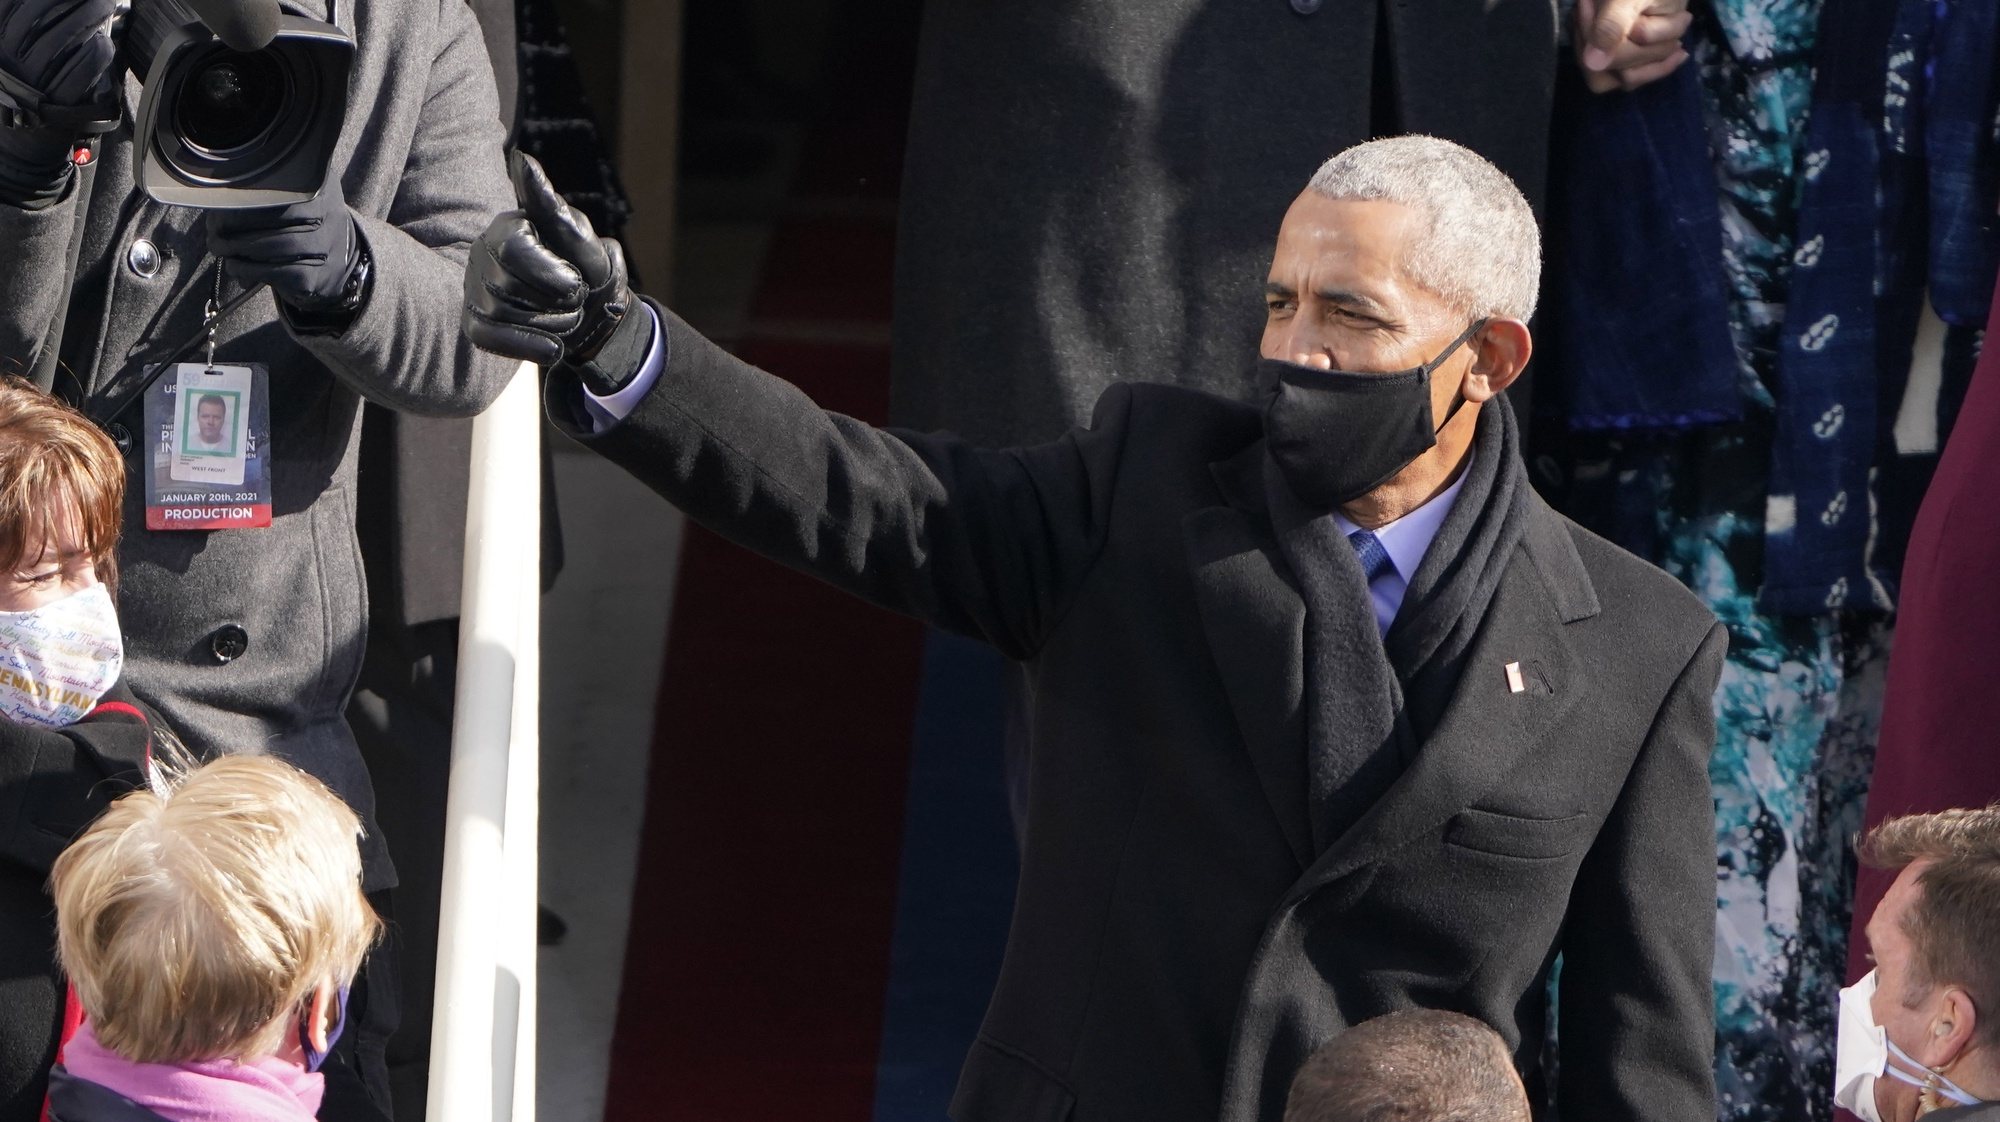 epa08953828 Former President Barack Obama gives a thumbs up after the inauguration of Joe Biden as US President in Washington, DC, USA, 20 January 2021. Biden won the 03 November 2020 election to become the 46th President of the United States of America.  EPA/Patrick Semansky / POOL